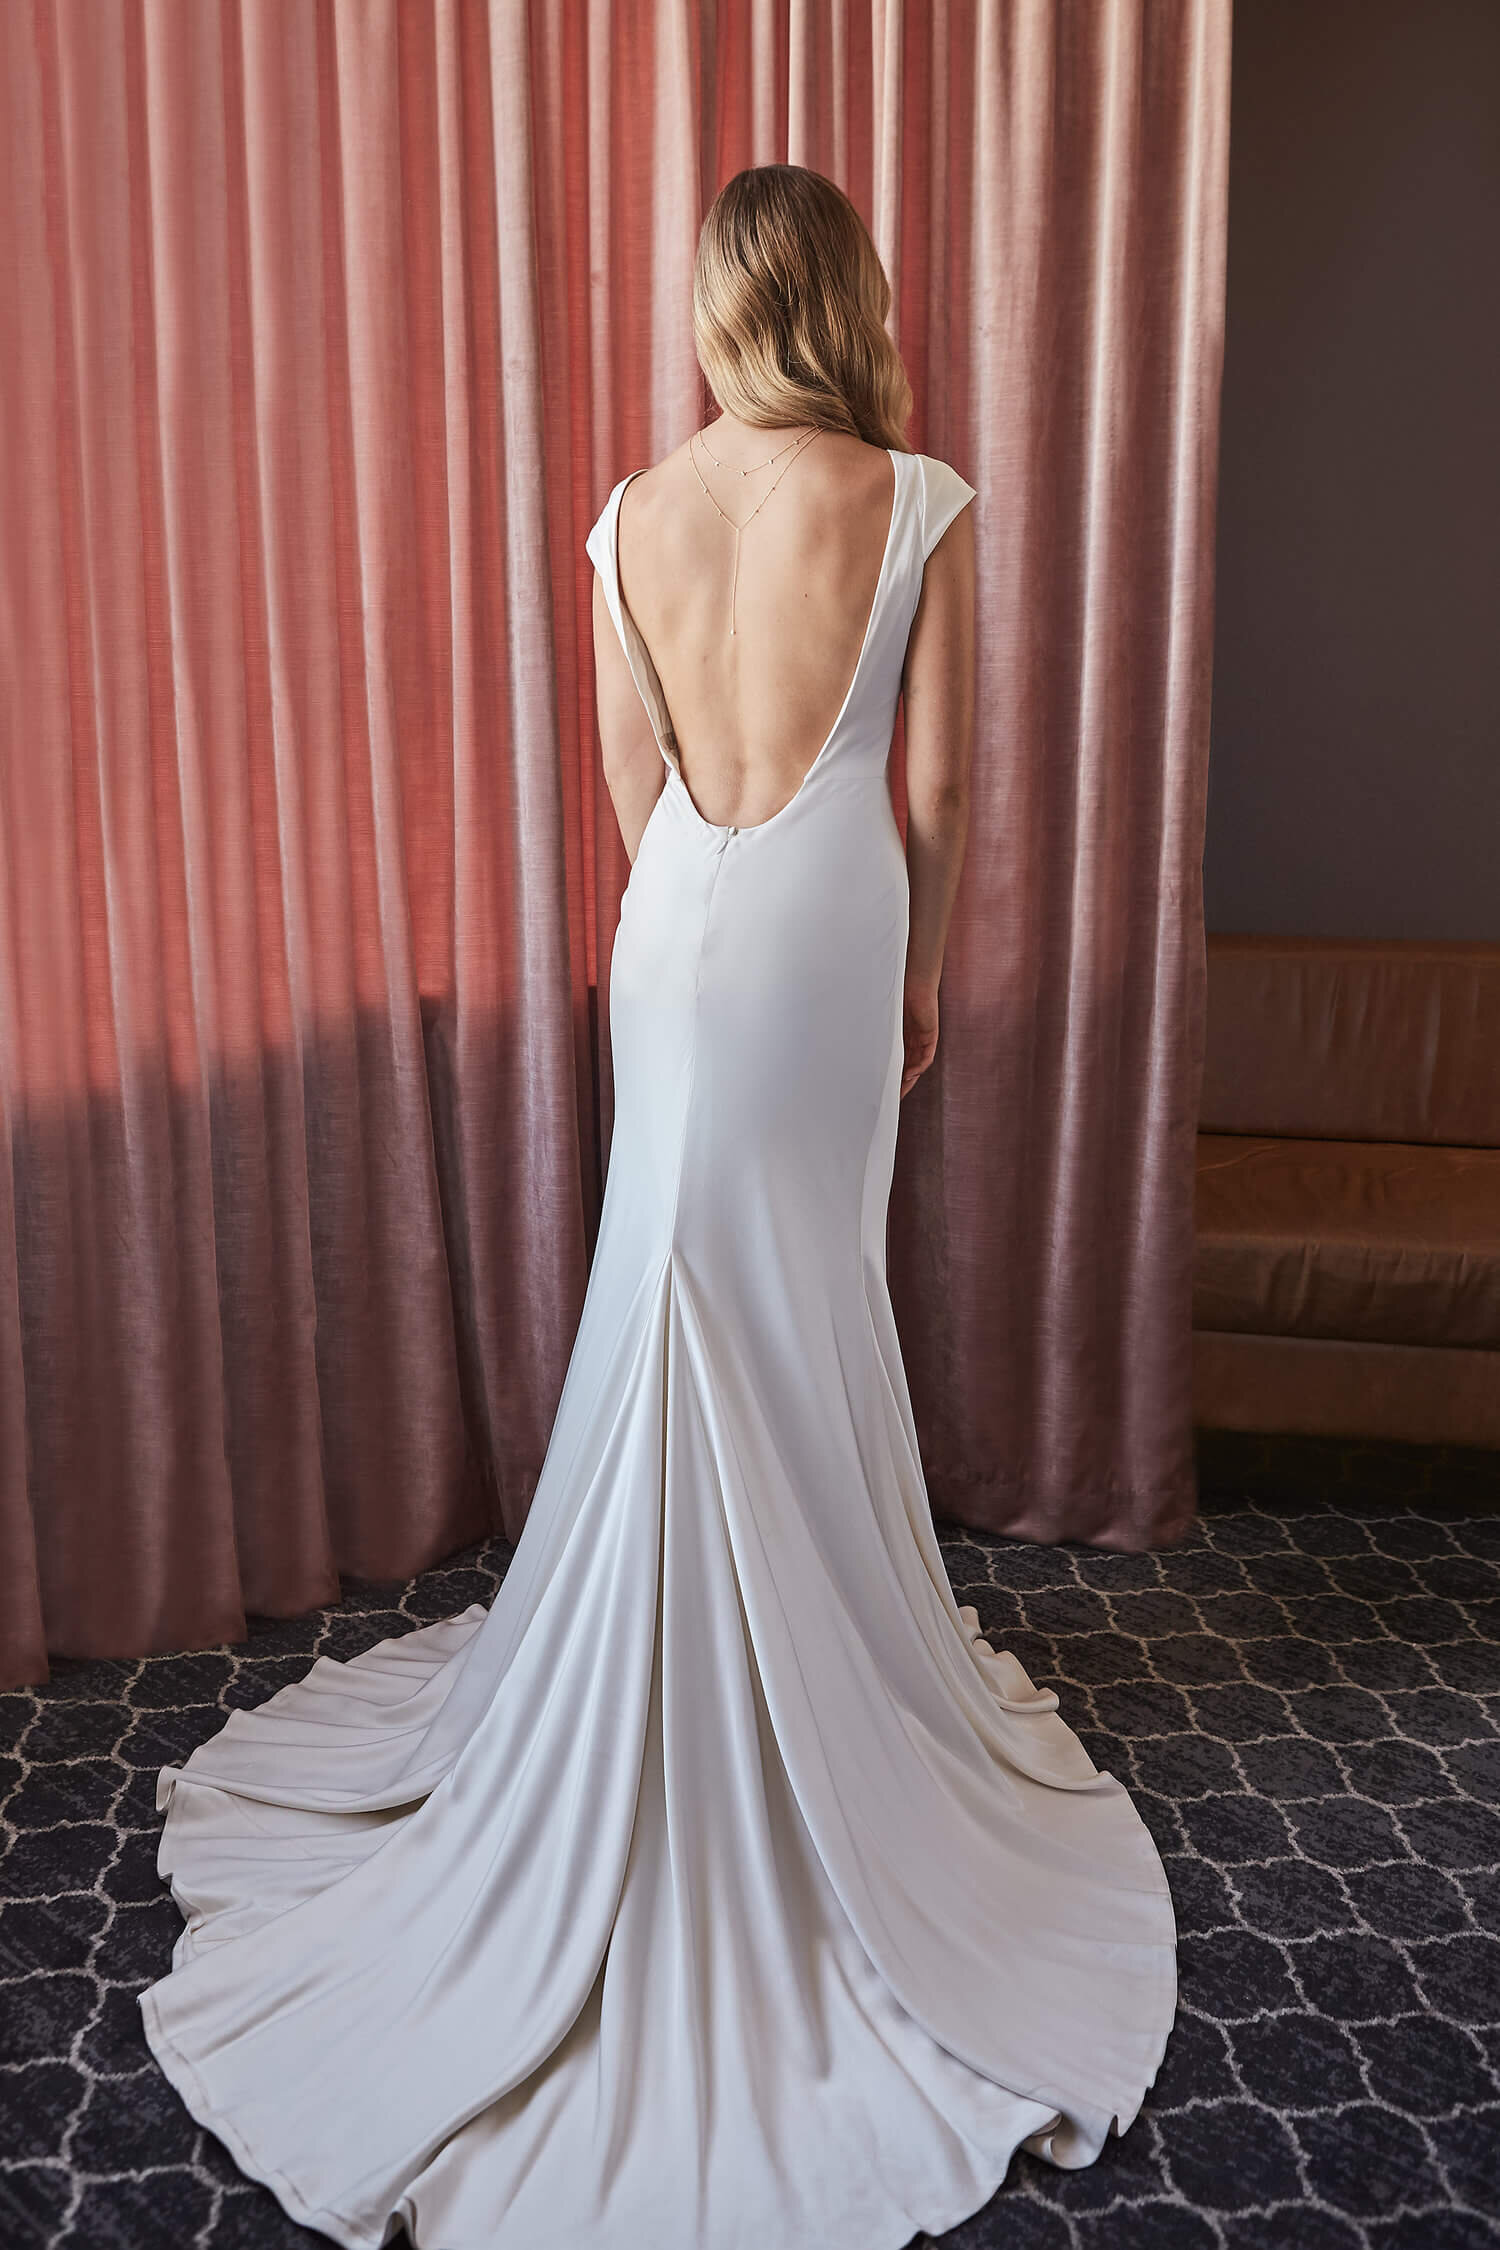 Darcy+Moira+Hughes+silk+couture+sydney+bridal+designer+boutique+backless+capped+sleeve (1).jpg